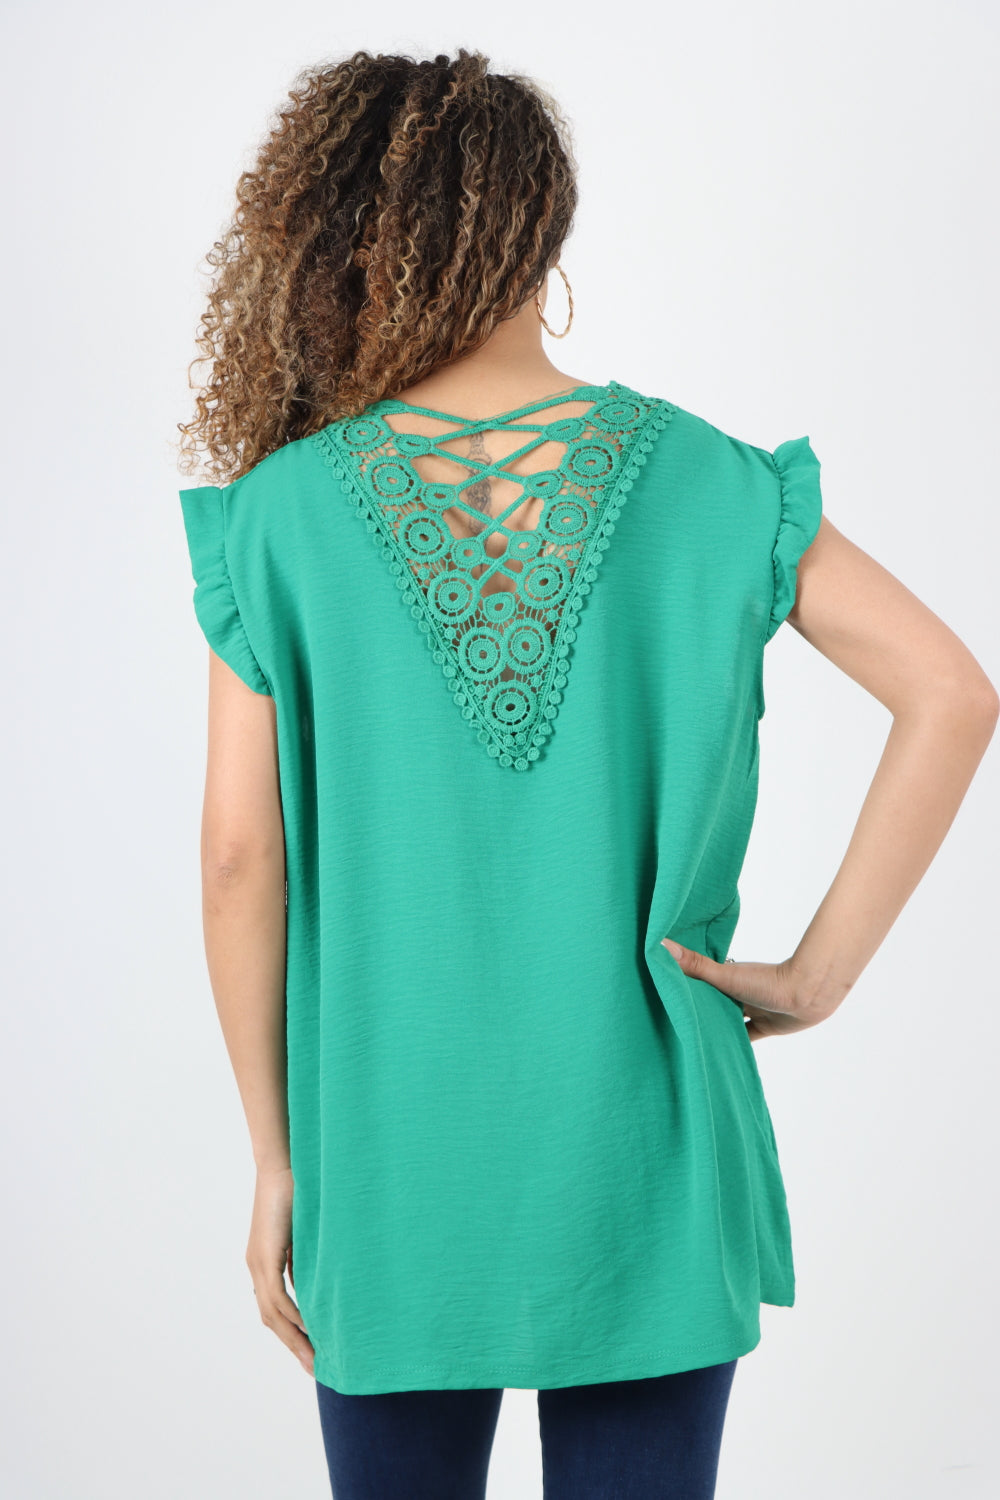 Italian Cap Sleeve With Detailed Back Lace Design Blouse Top